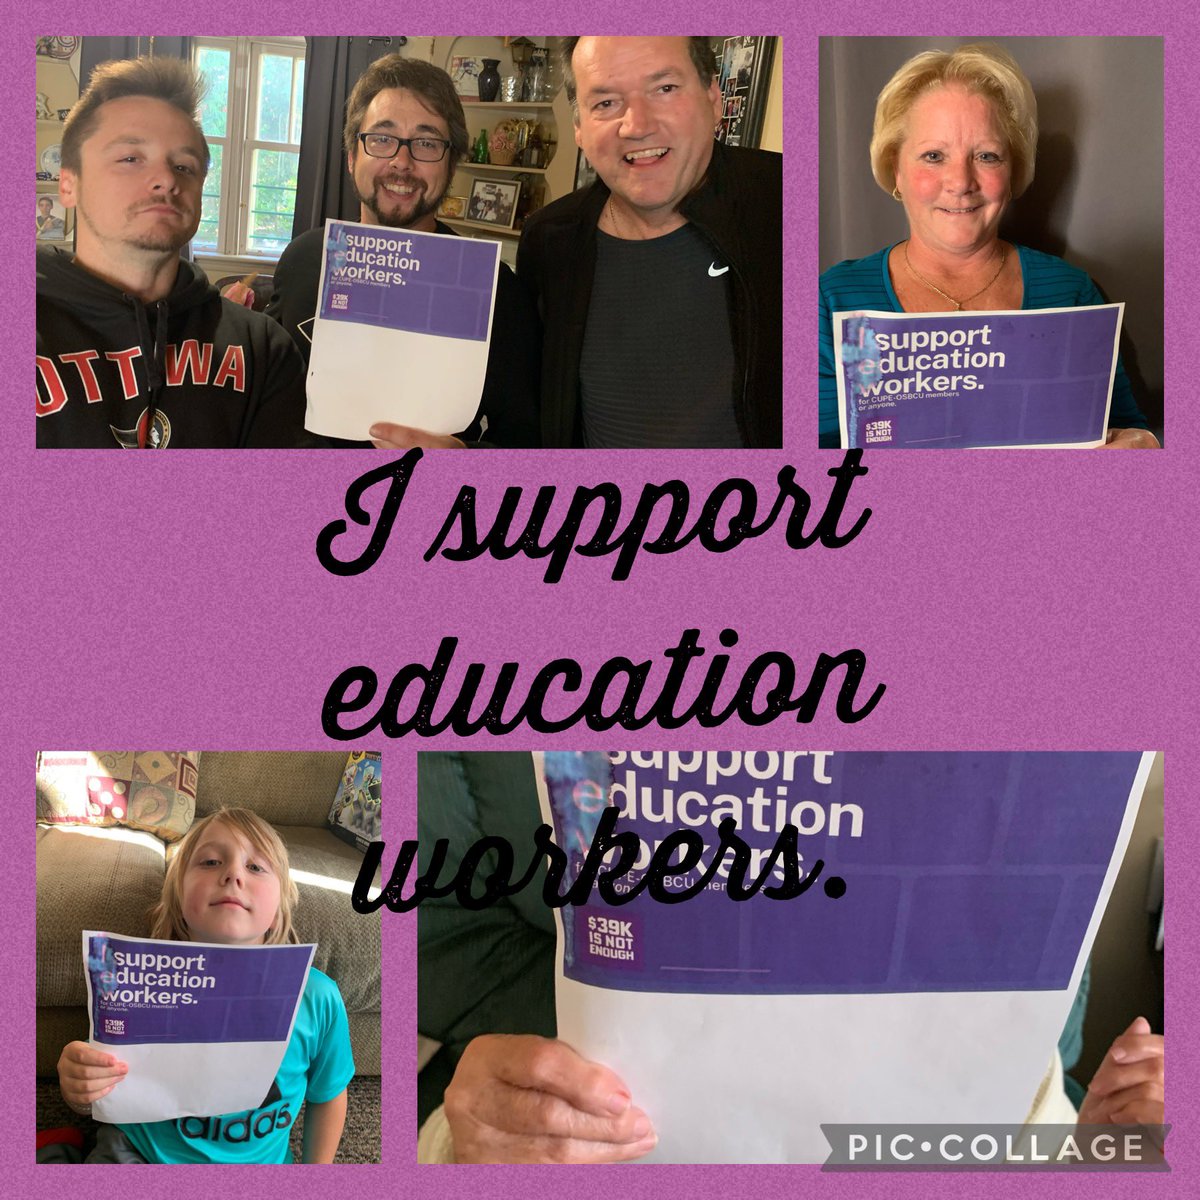 So I had the talk😬 Most people I spoke with, were shocked,at the salary that education workers make.#39kisnotenough @CUPEOntario @CUPE2357 #WeStandUnited #wesupporteducationworkers